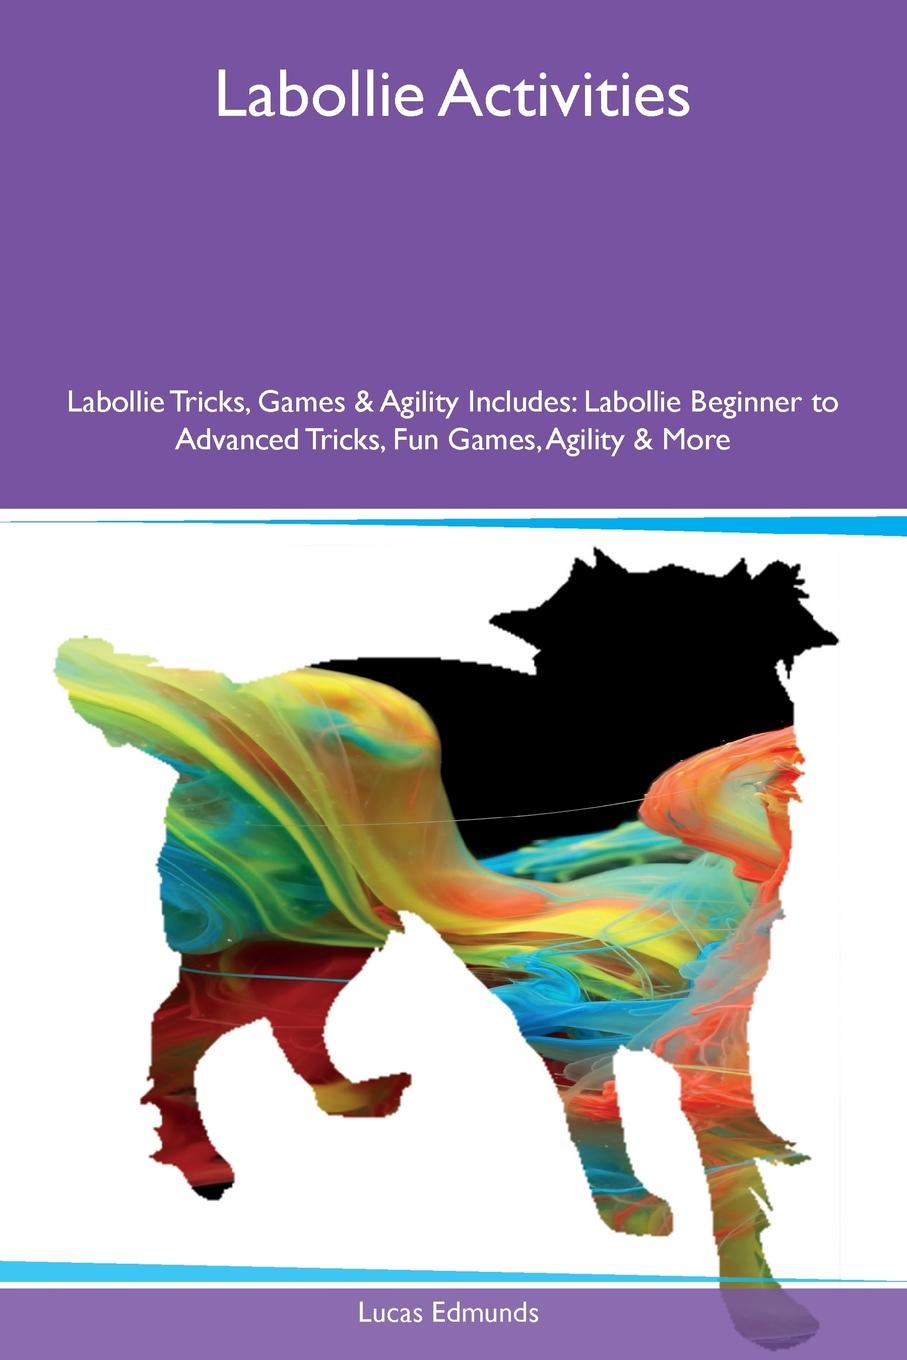 Labollie Activities Labollie Tricks, Games & Agility Includes. Labollie Beginner to Advanced Tricks, Fun Games, Agility & More